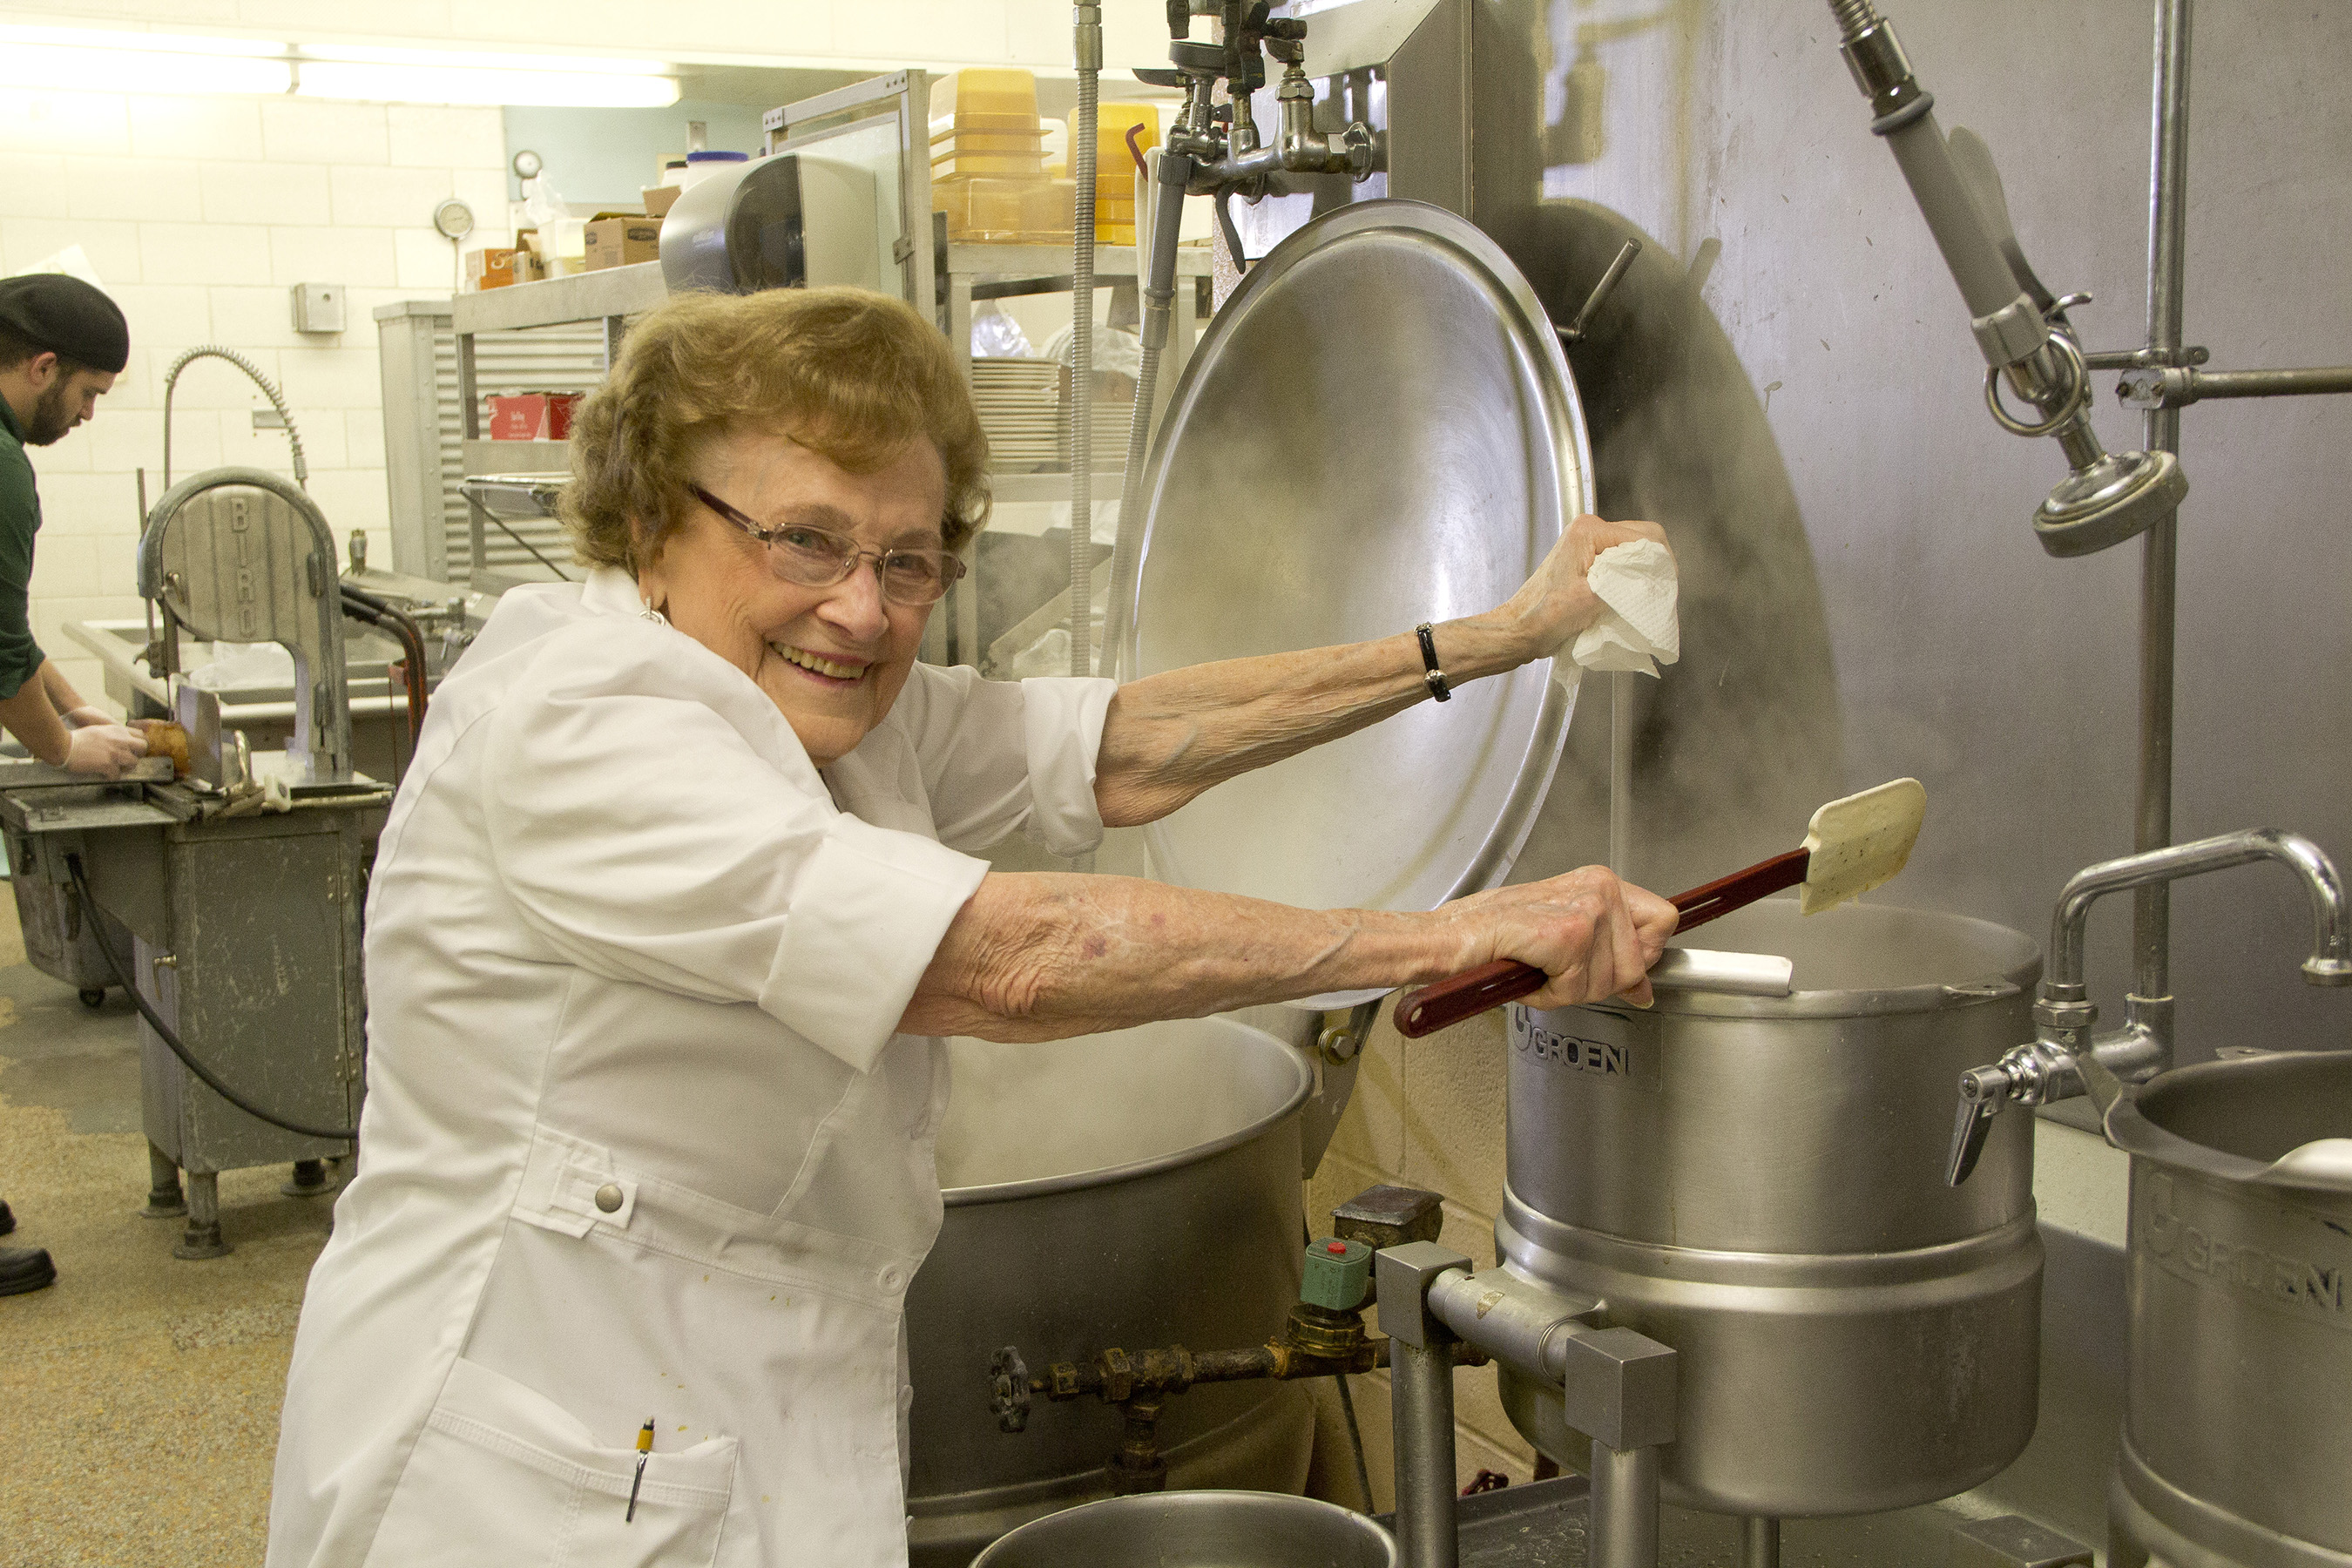 Dorothy Zehnder in the kitchen of the Bavarian Inn Restaurant preparing each day’s food offerings for guests.